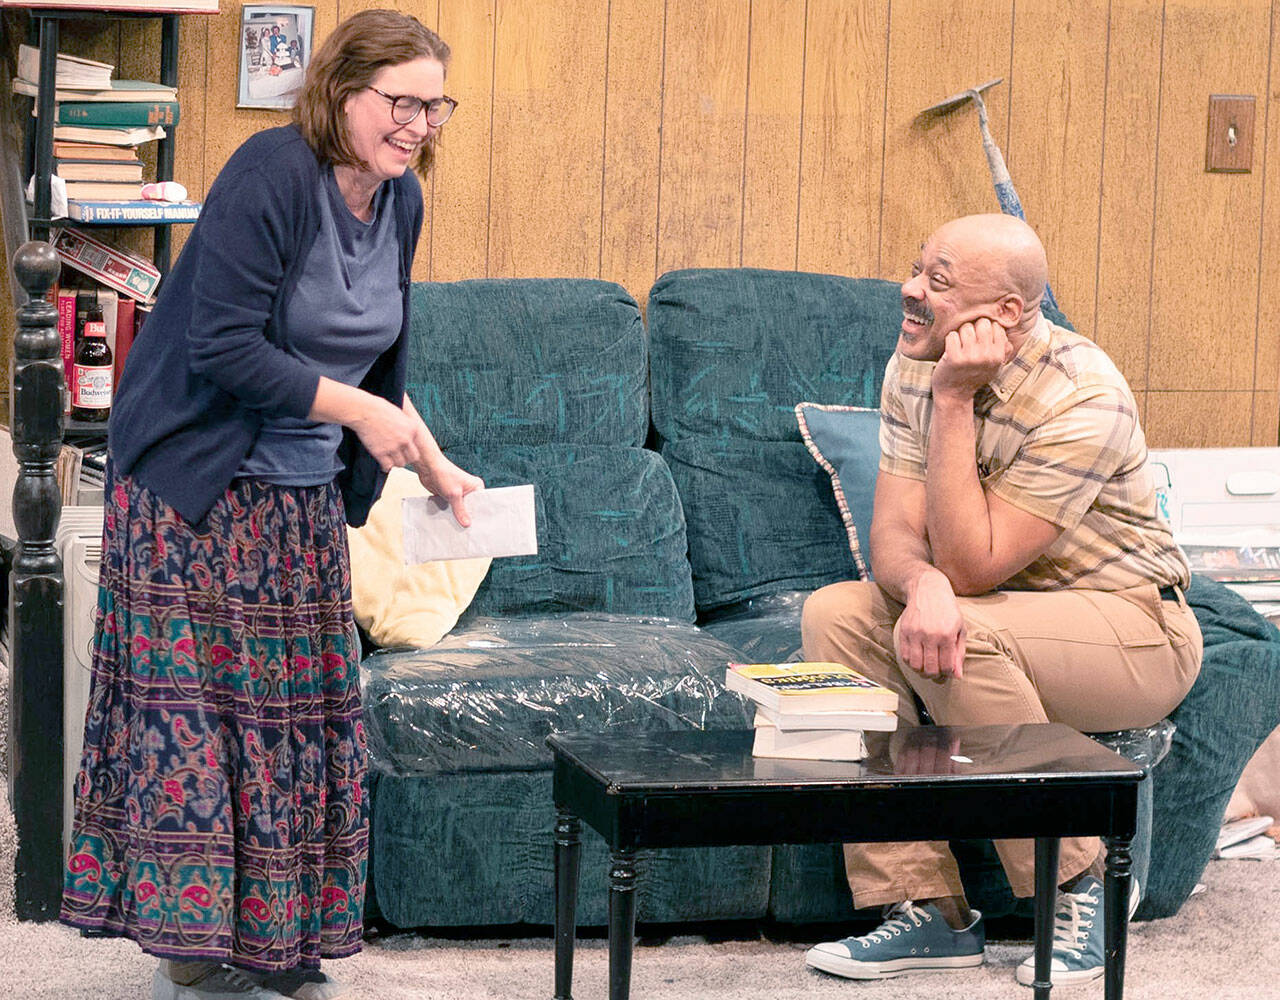 Maude Eisele (Mabel) and Brace Evans (Todd) become acquainted in an awkward matchmaking scene in “The People Downstairs” at Key City Public Theatre.